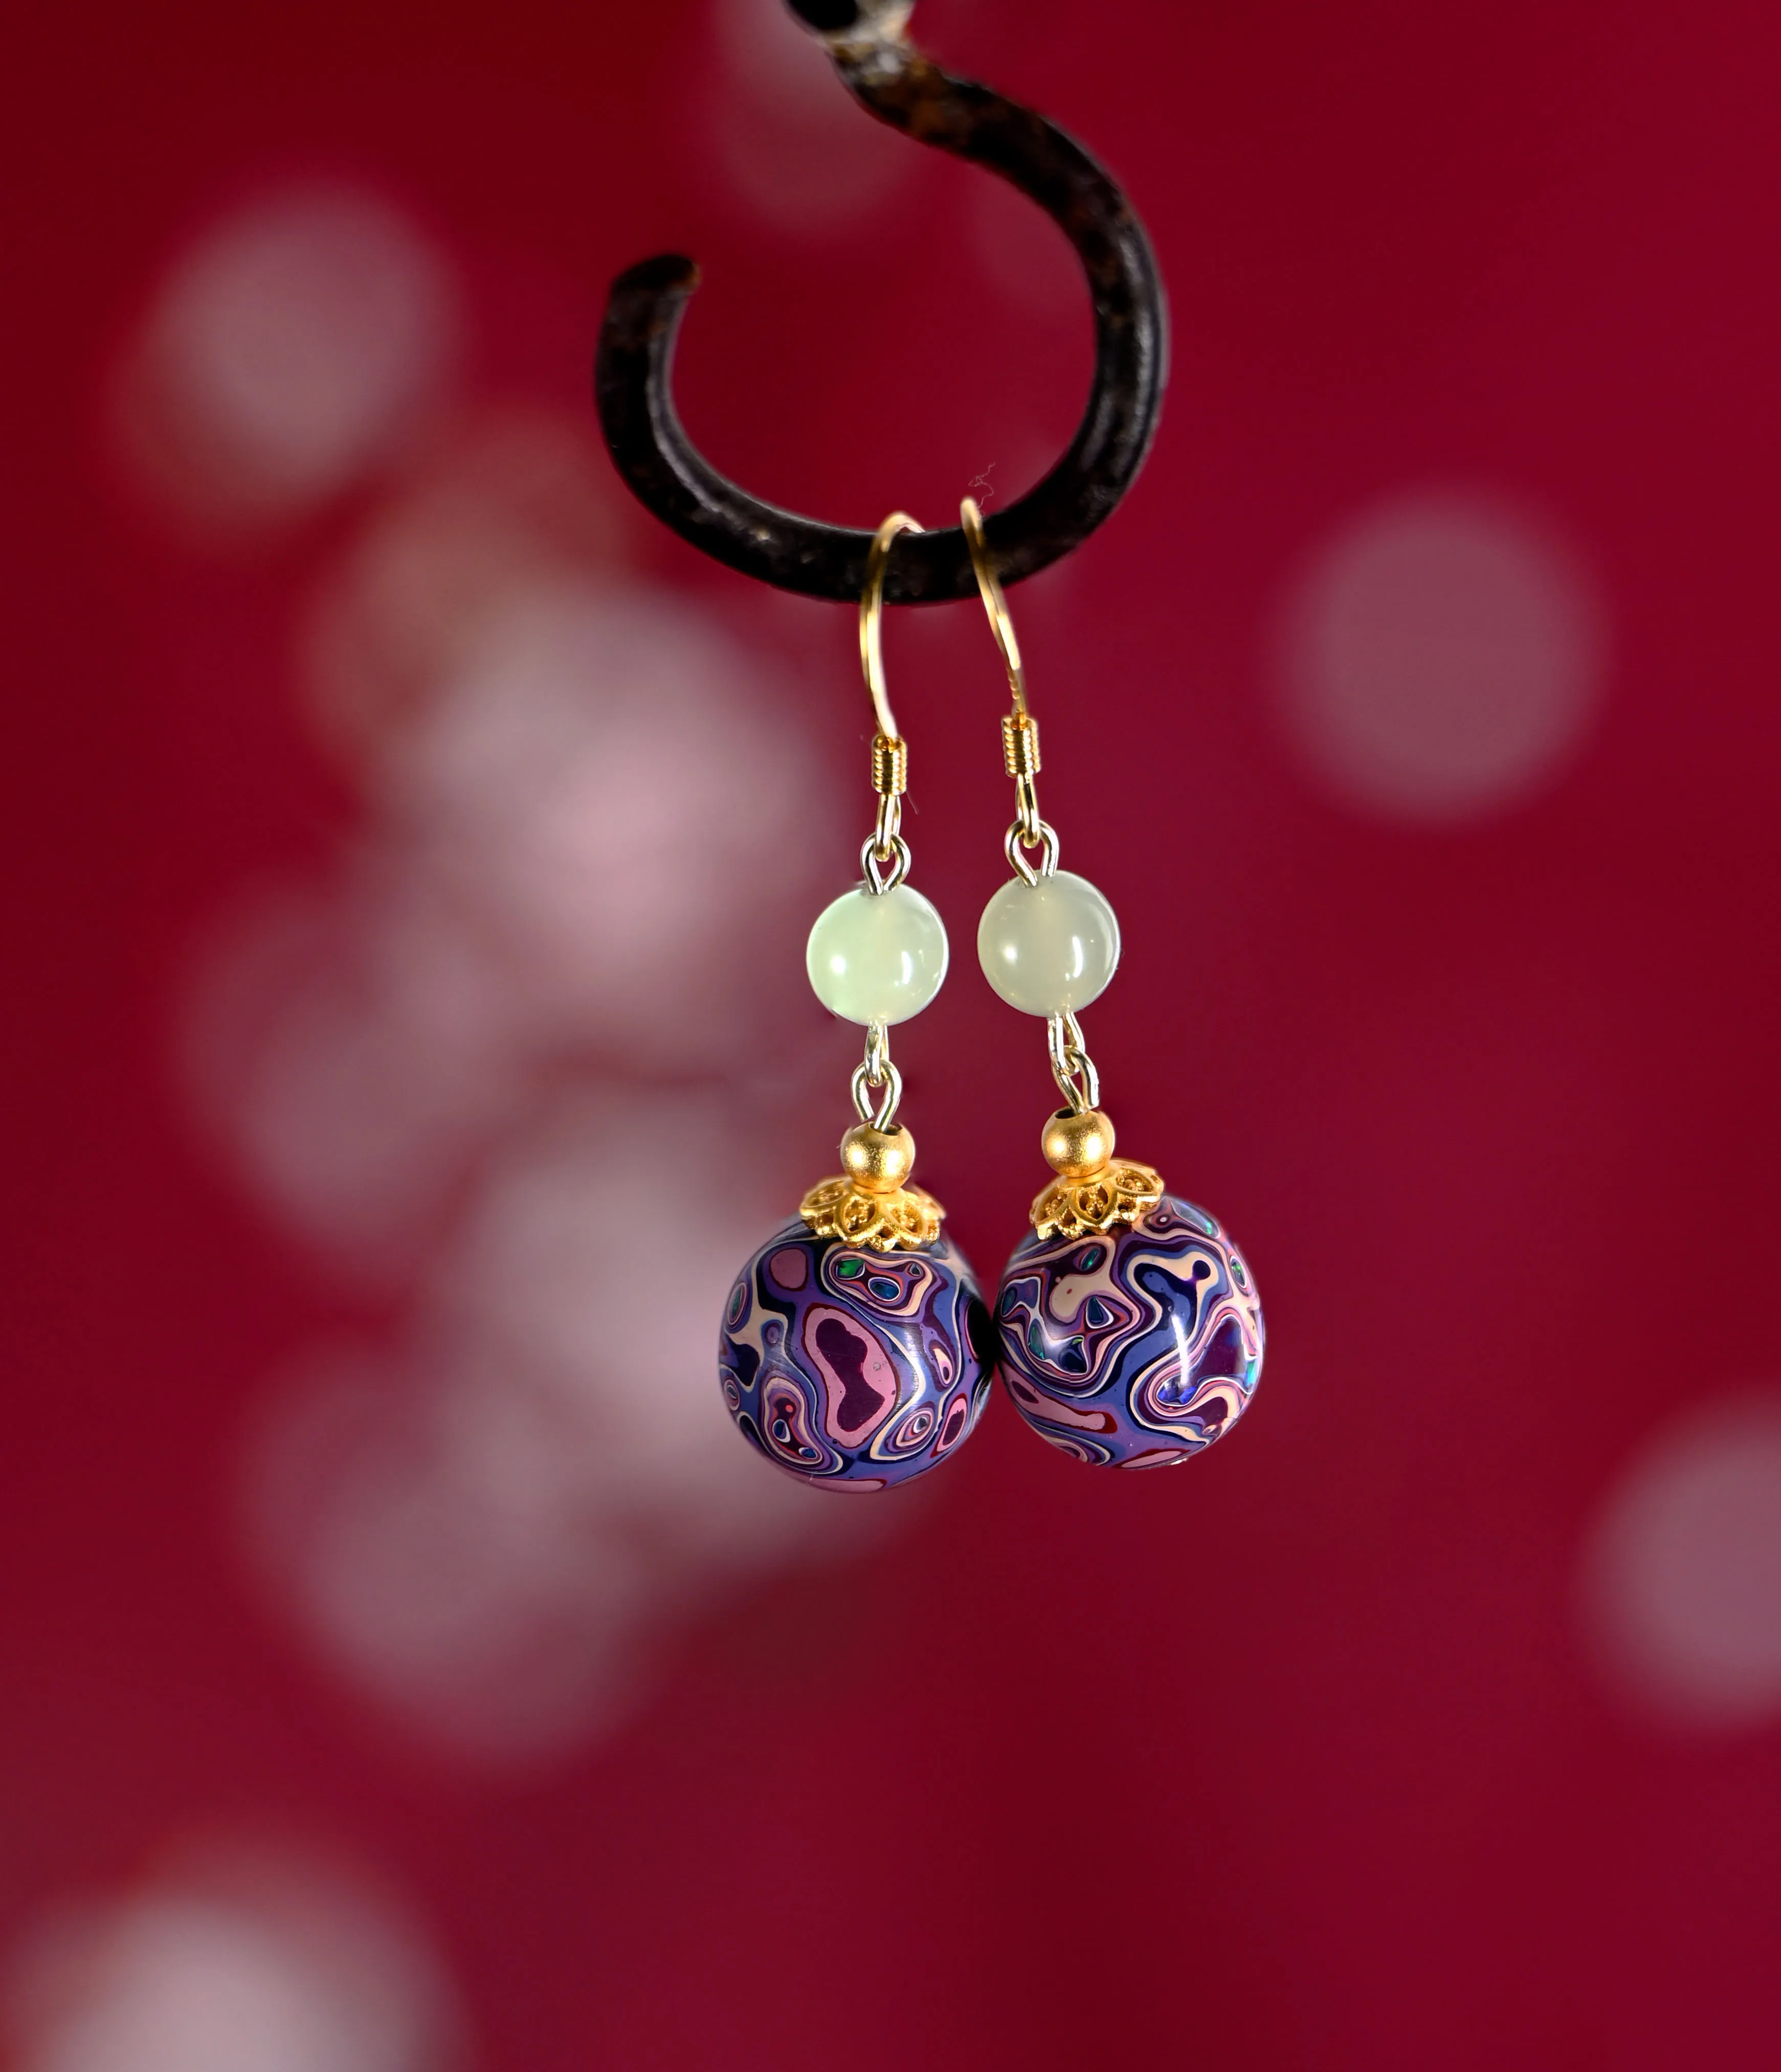 

Inheritance of ancient oriental techniques handmade colorful Chinese lacquer jewelry earrings decorative versatile earrings